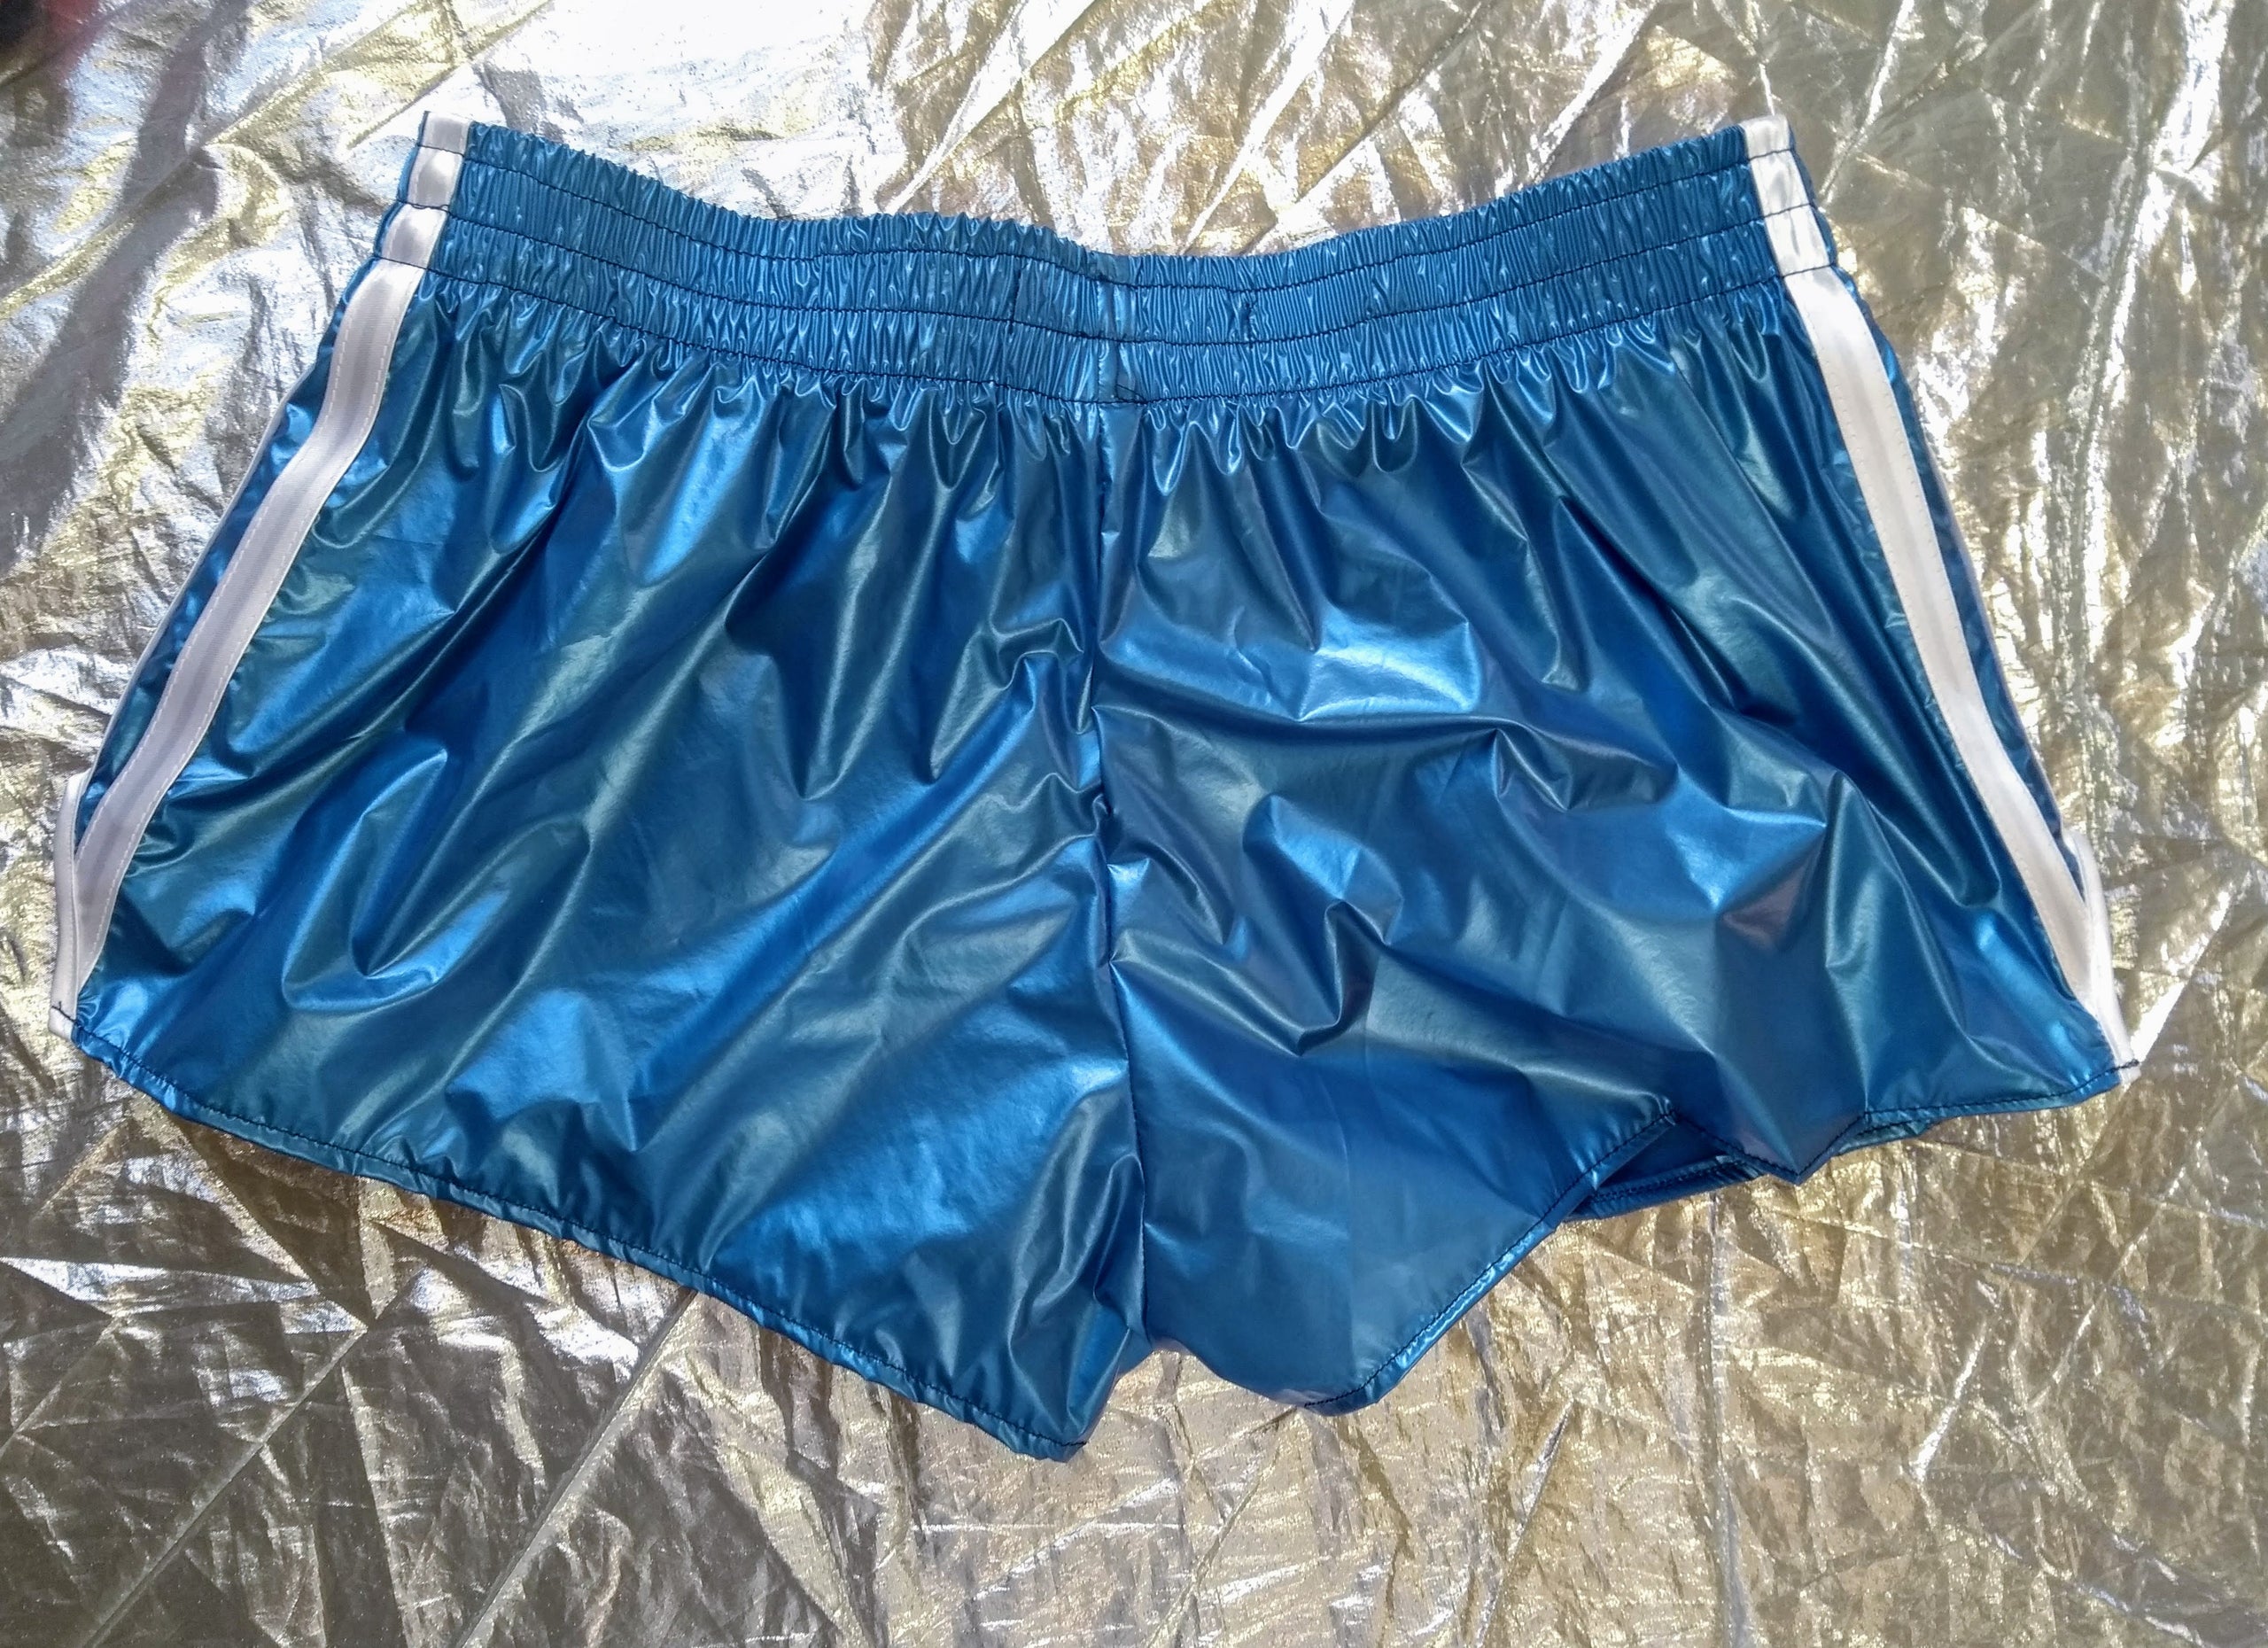 Design Your Own Footy Shorts in glossy metallic blue ultra-thin nylon ...